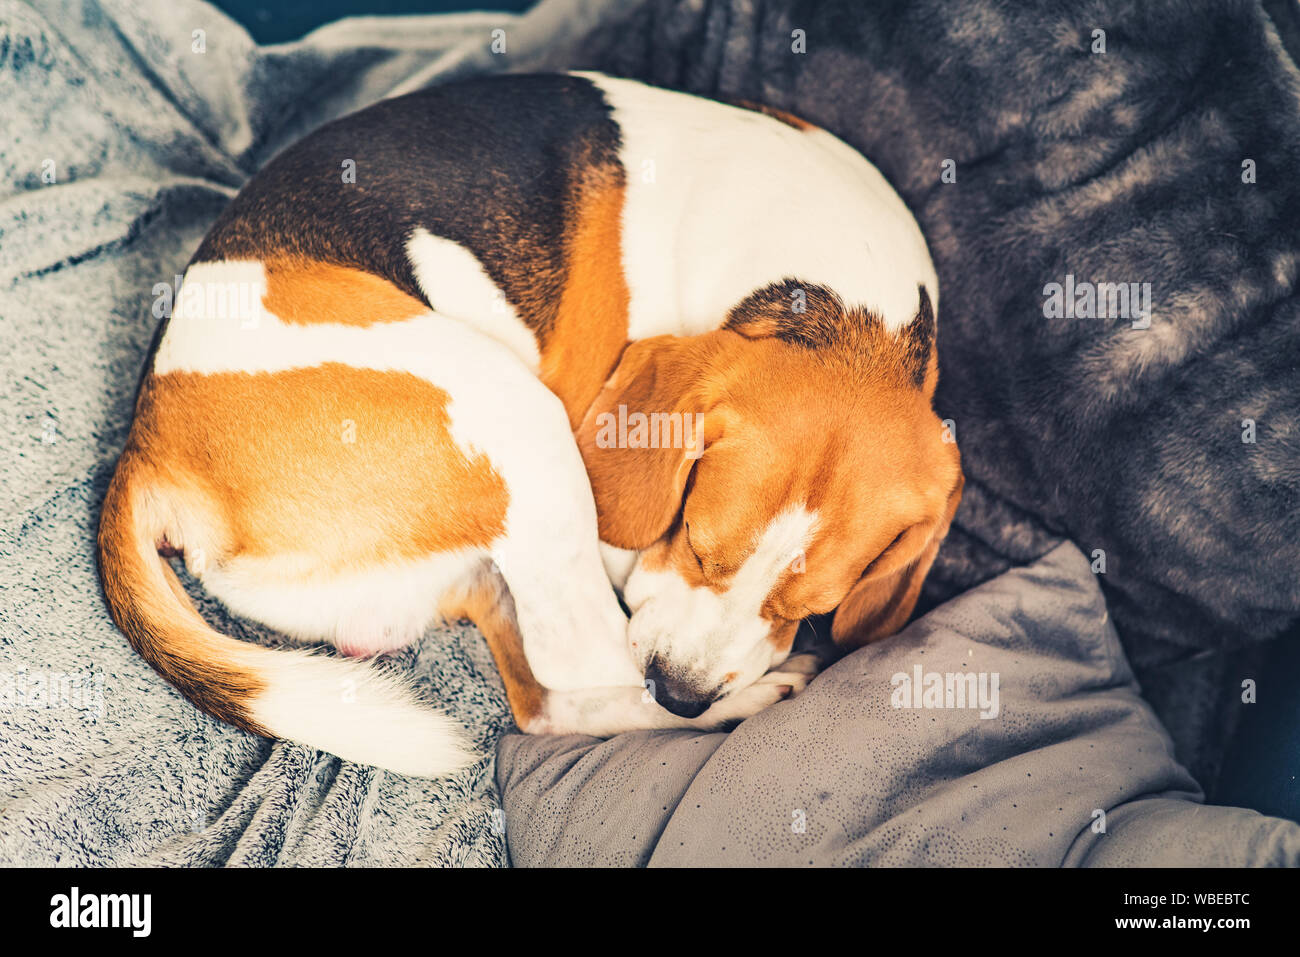 Dog Sleeping In Car High Resolution Stock Photography and Images - Alamy